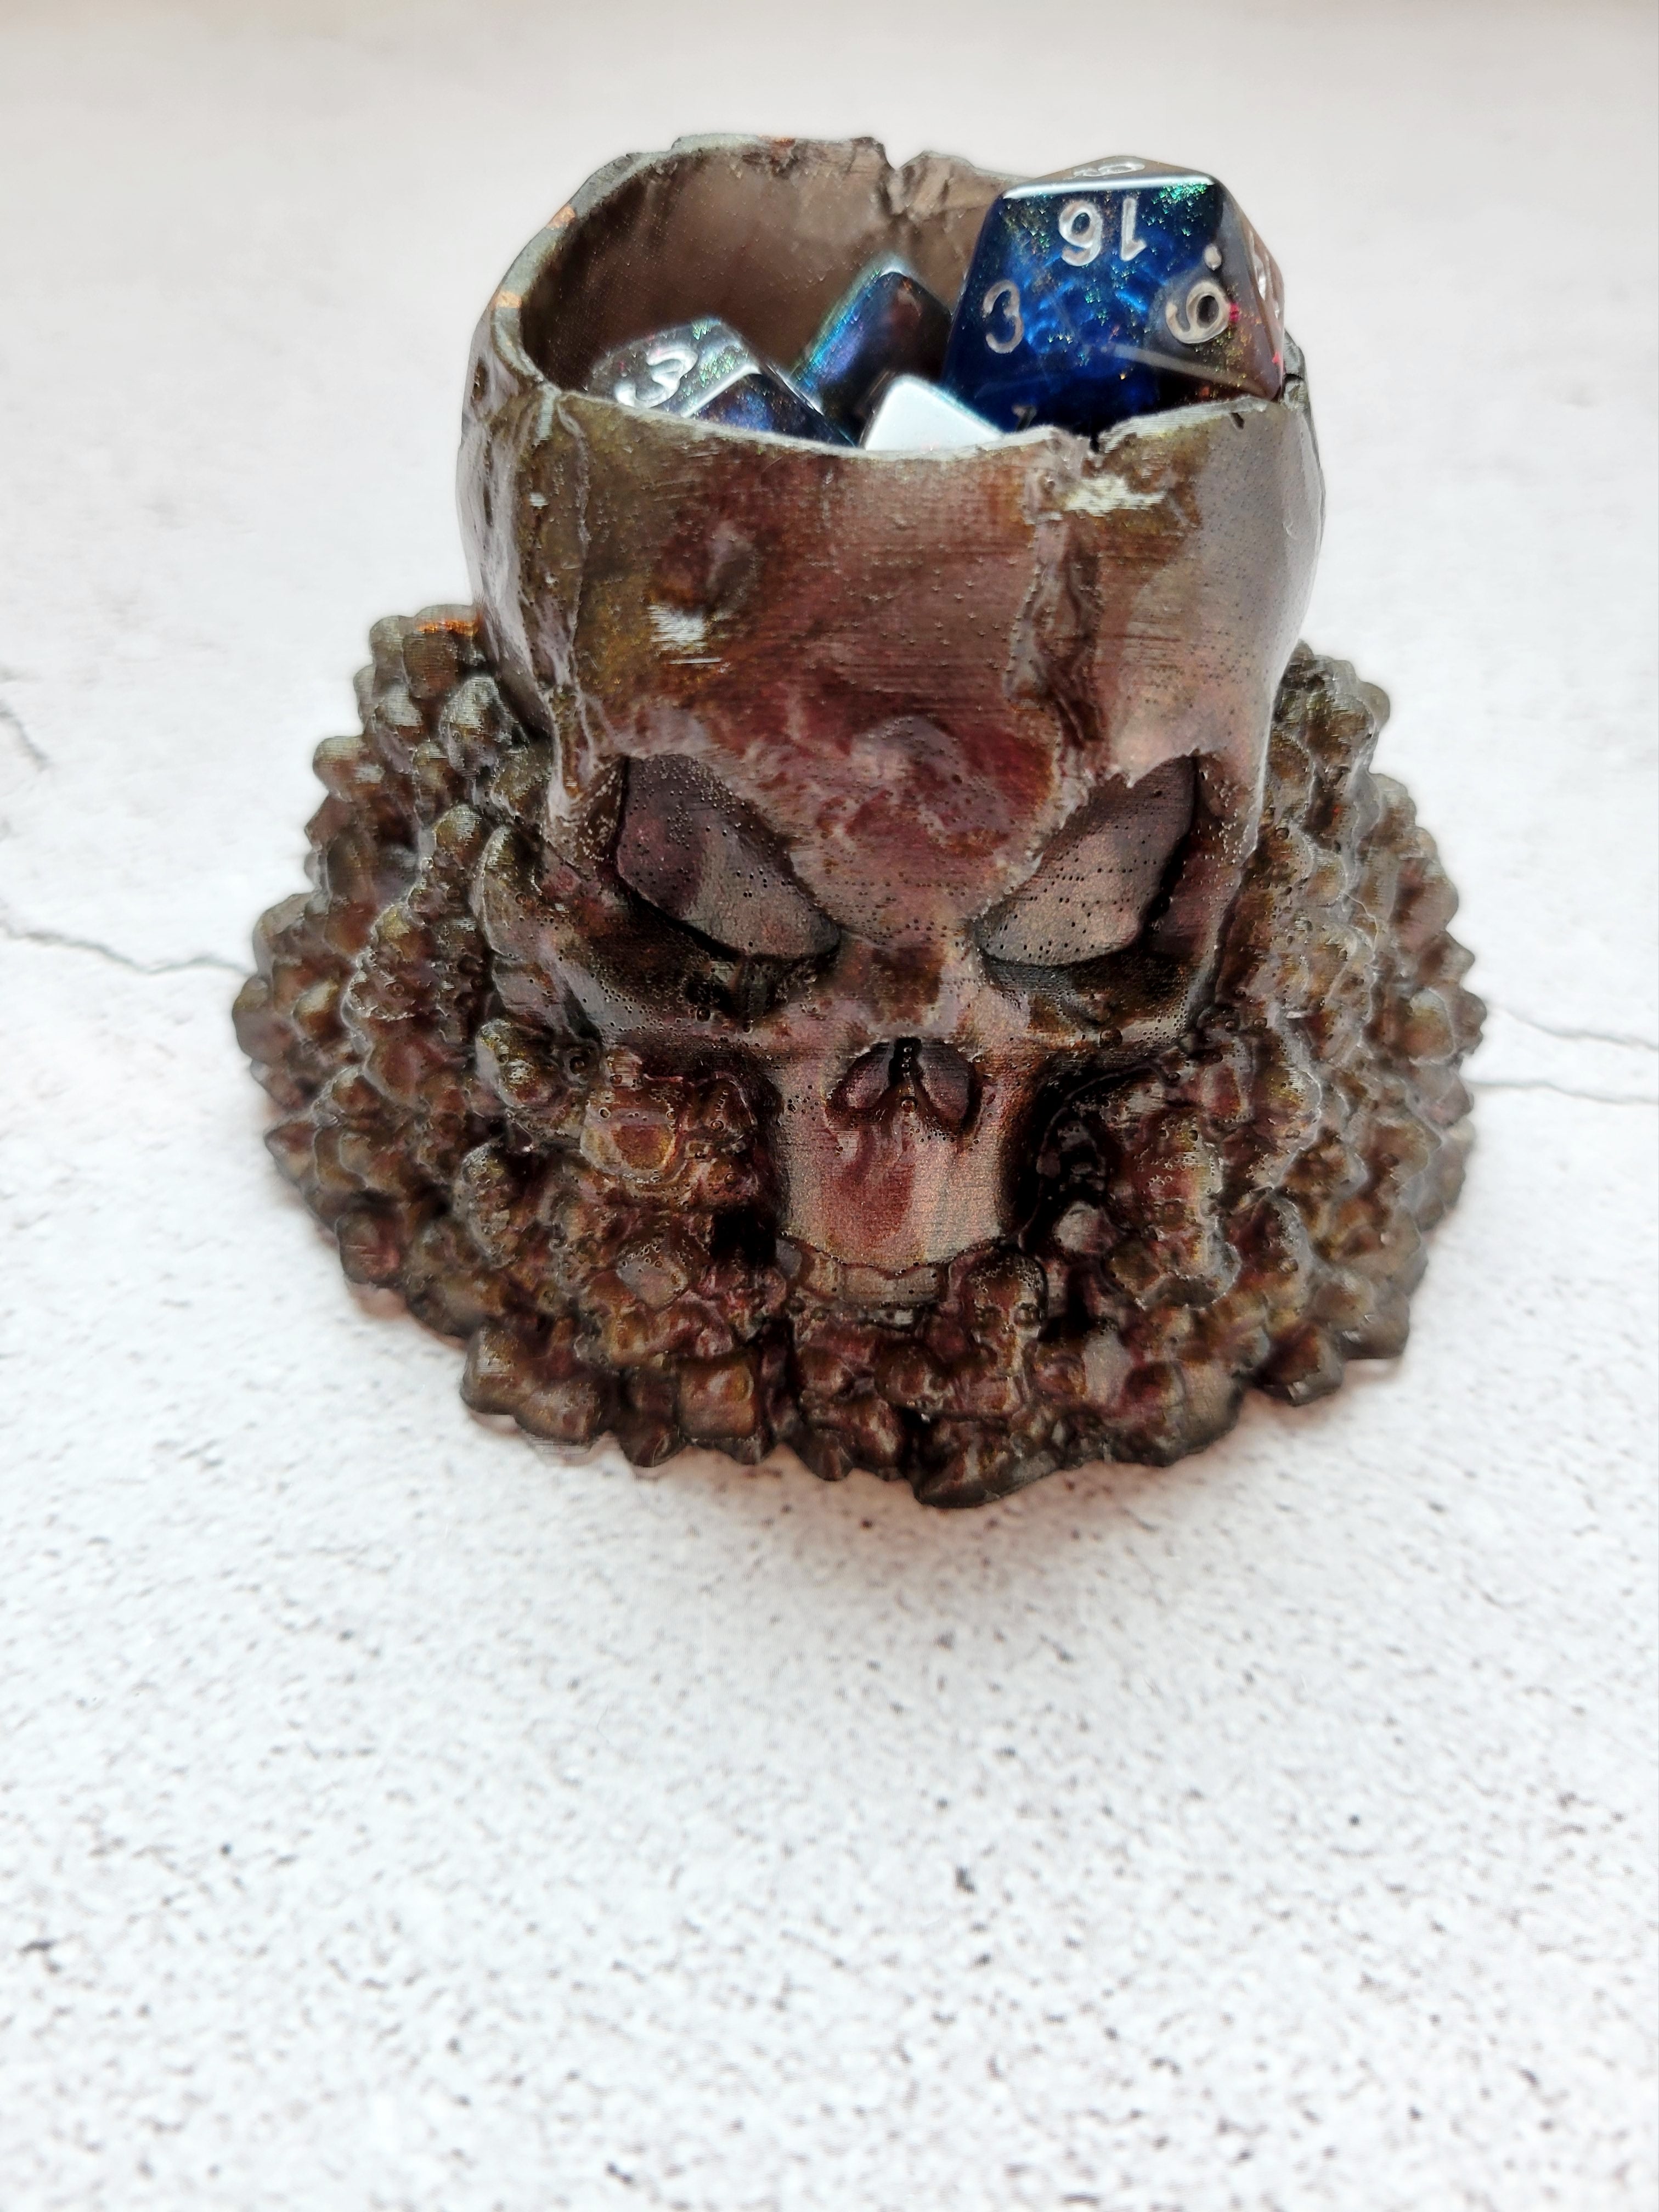 Resin skull dice cup. Big skull holds 2 sets of ttrpg dice comfortably with room for a few extra. The large skull sits on a pile of stones and smaller skulls. The color is a bronze reddish brown. Front view with dice inside